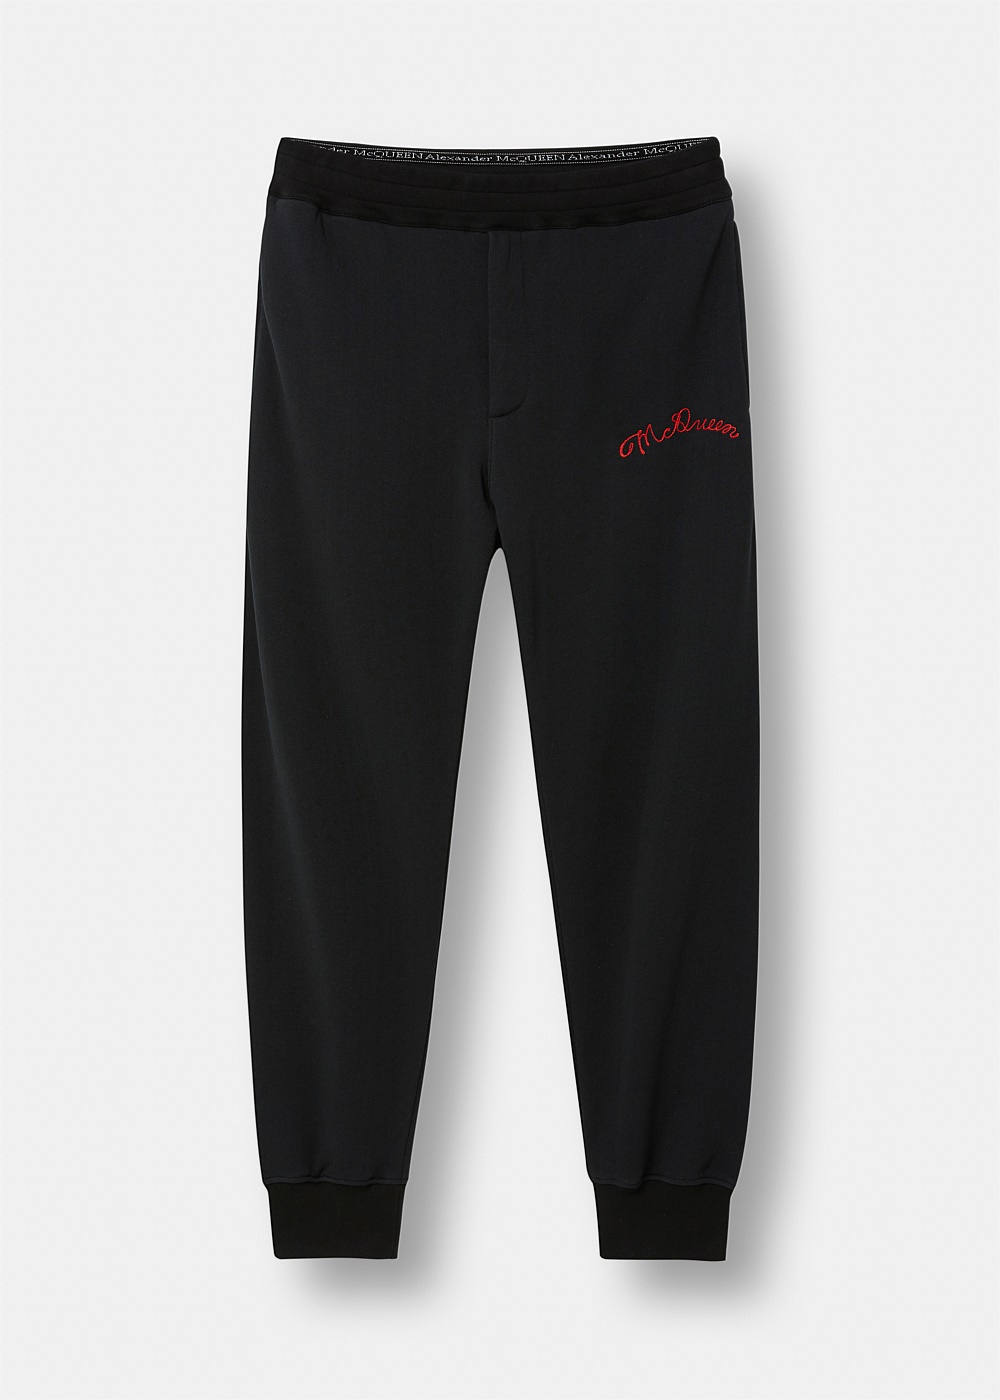 Clothing - McQueen Embroidered Sweatpants